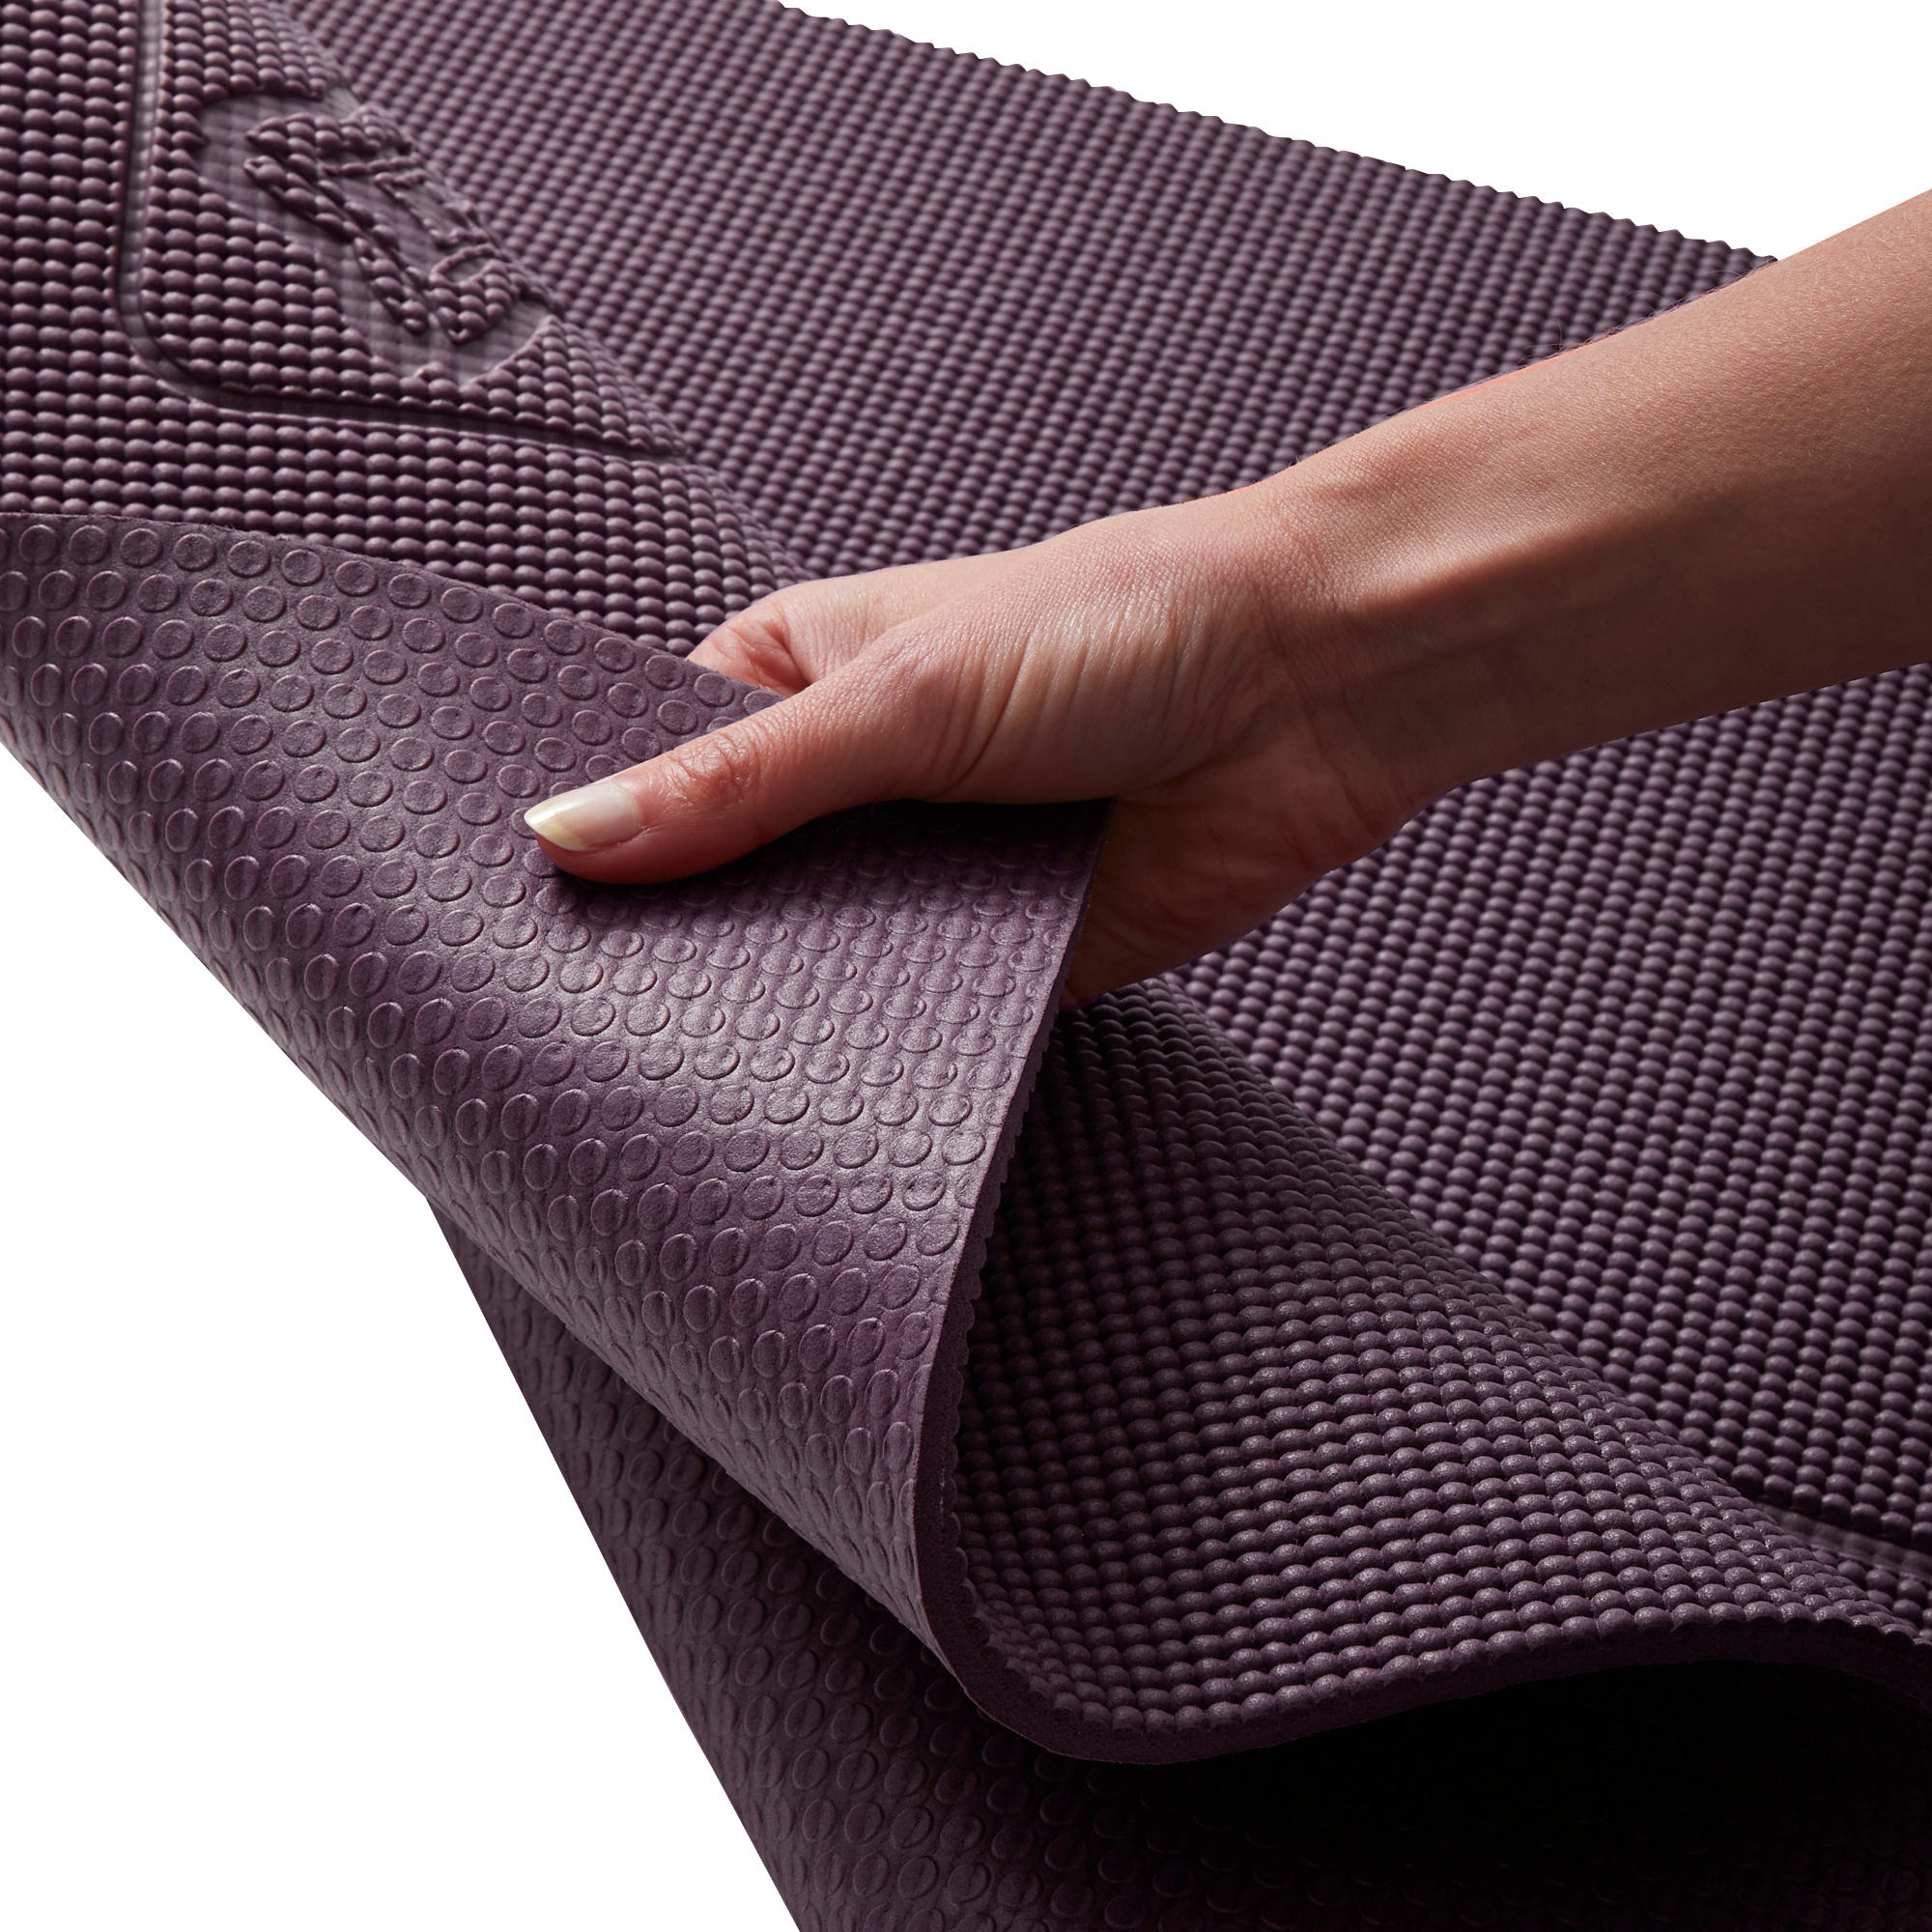 Kimjaly Gentle Yoga Mat 183 cm X 61 cm X 8 mm Soft Thickness